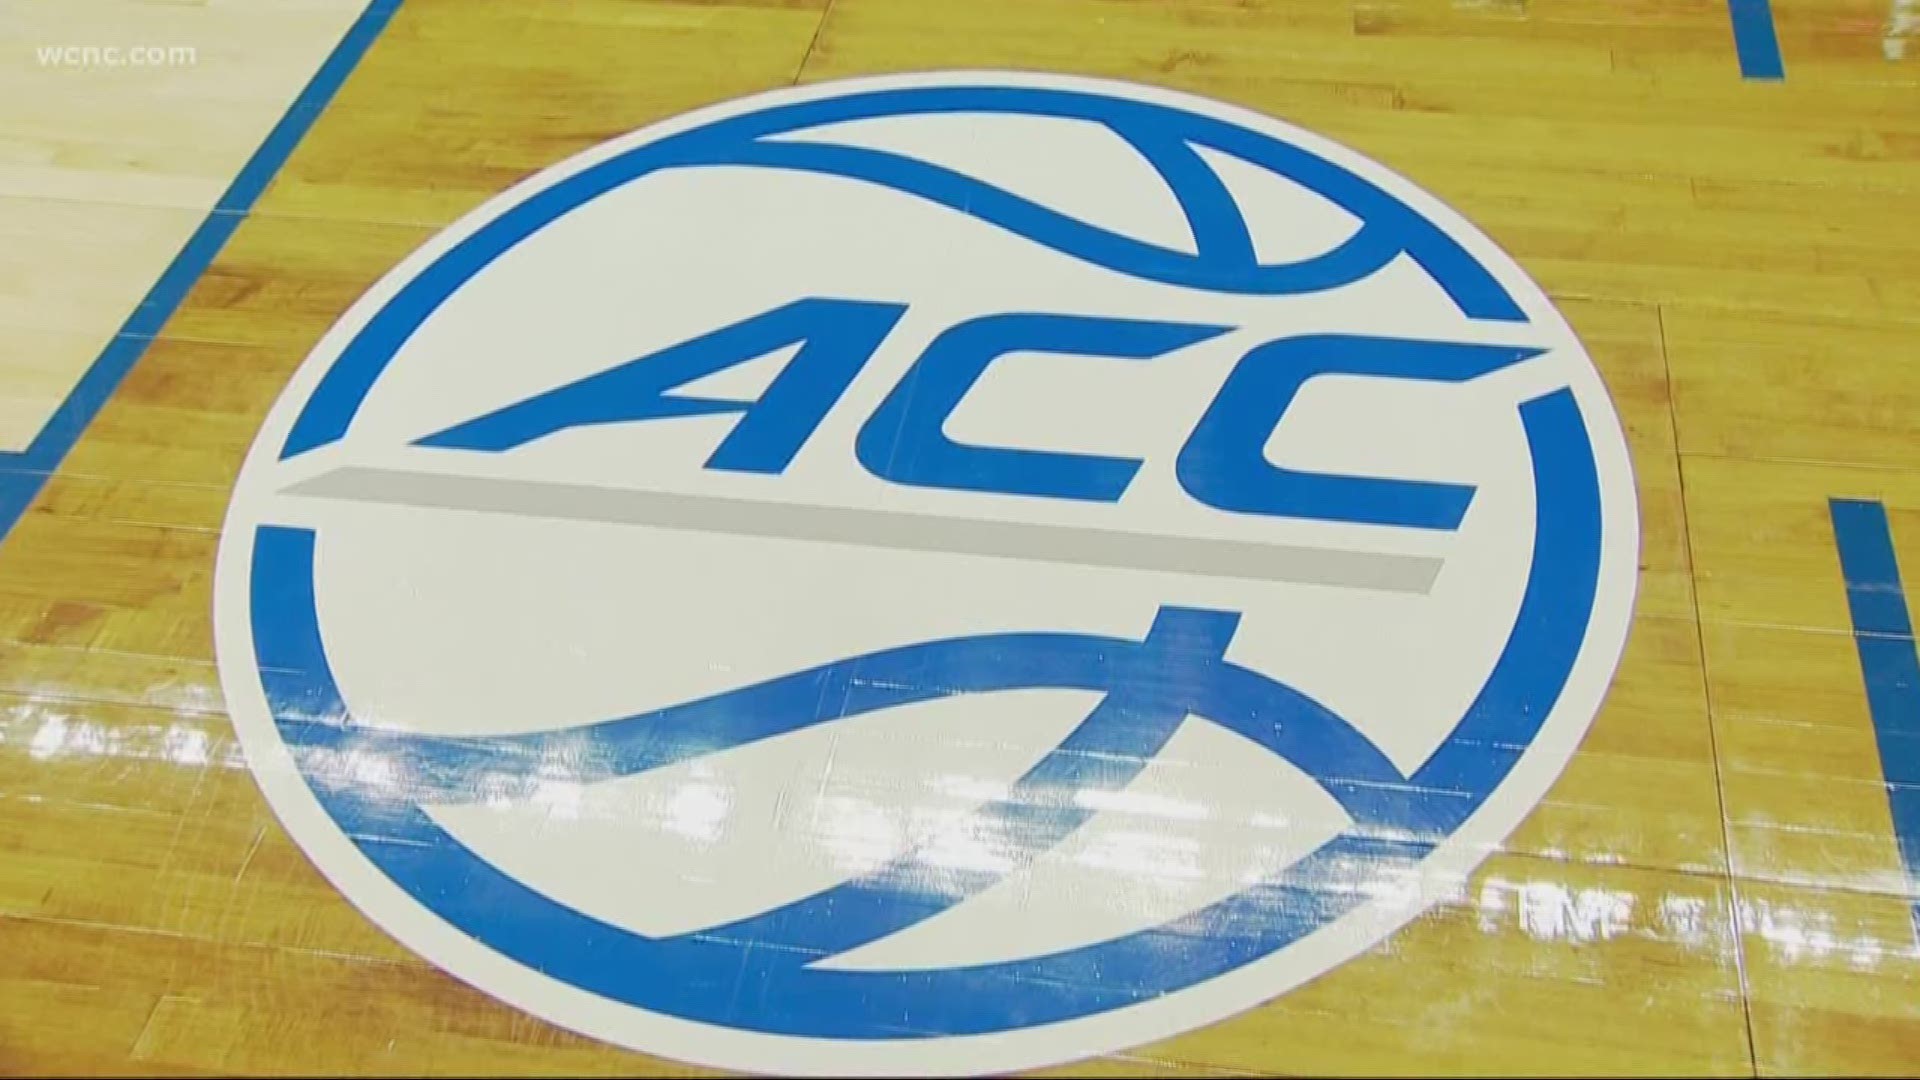 For the first time since 2008, the ACC basketball tournament is back in the Queen City. And if you ask many players and coaches, the tournament should always be in North Carolina.